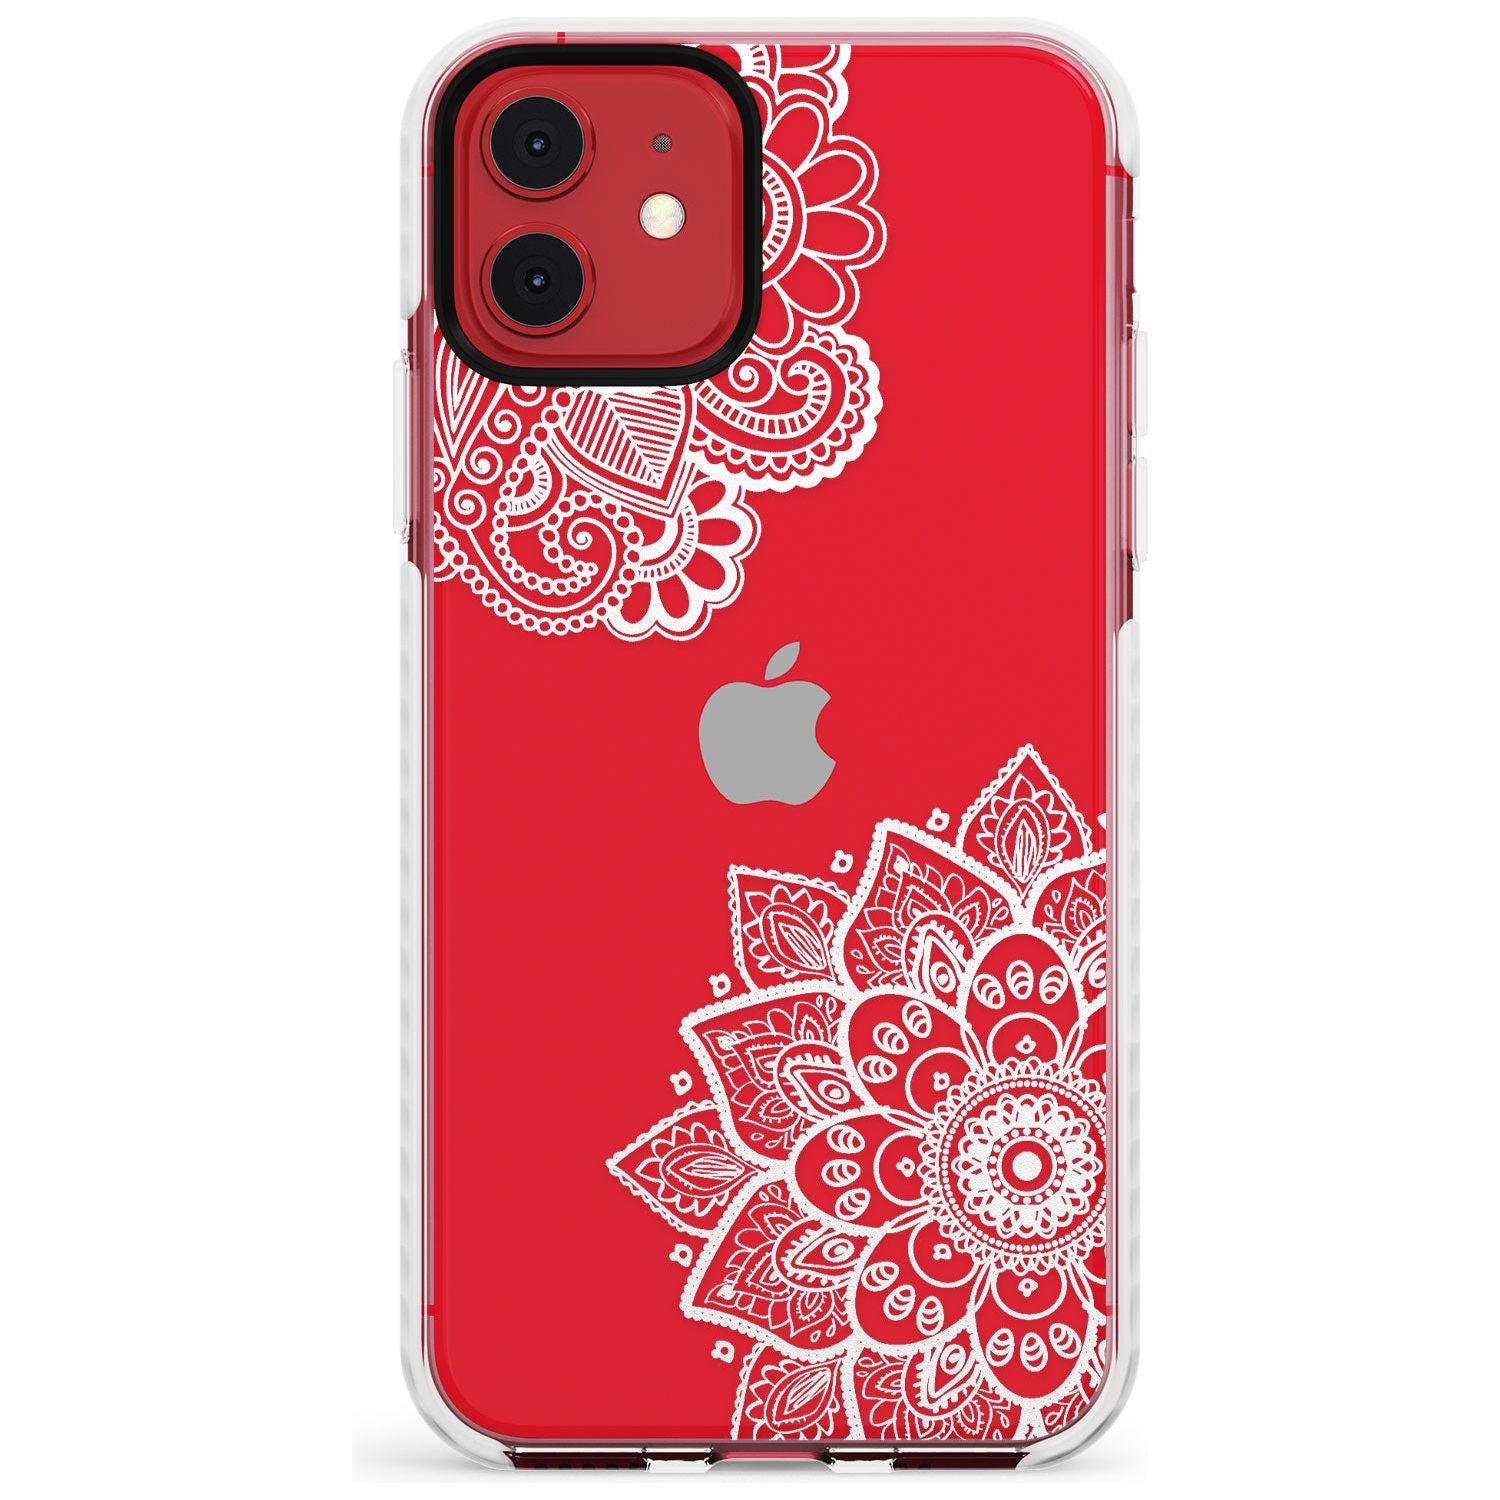 White Henna Florals Impact Phone Case for iPhone 11